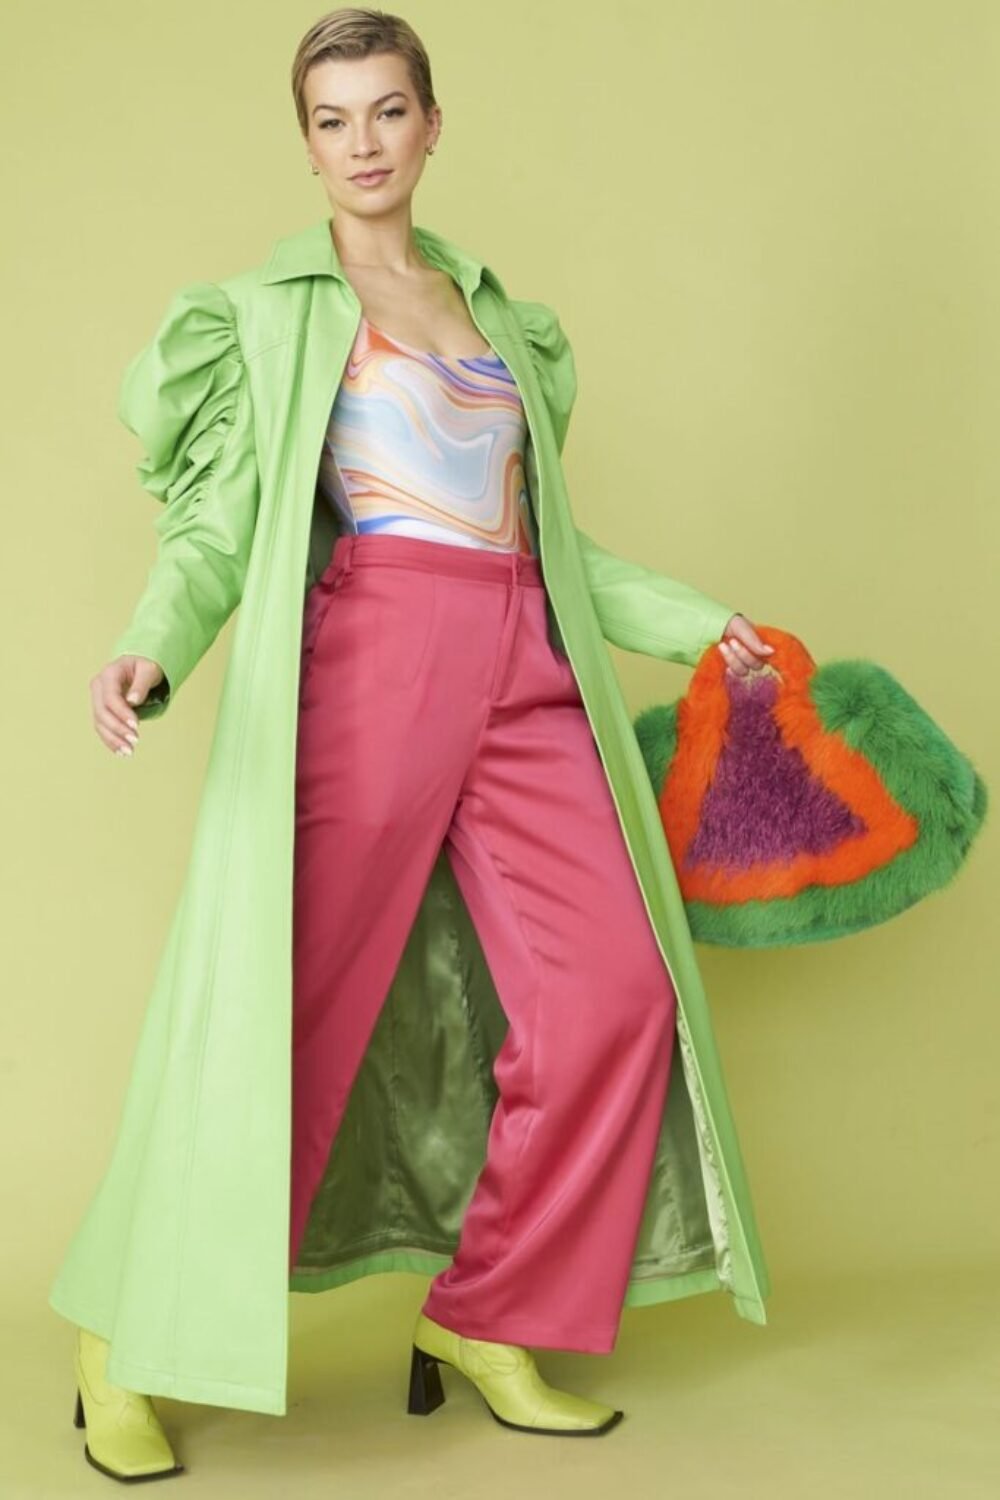 Shop Lux Lime Eco Leather Grande Trench Coat and women's luxury and designer clothes at www.lux-apparel.co.uk